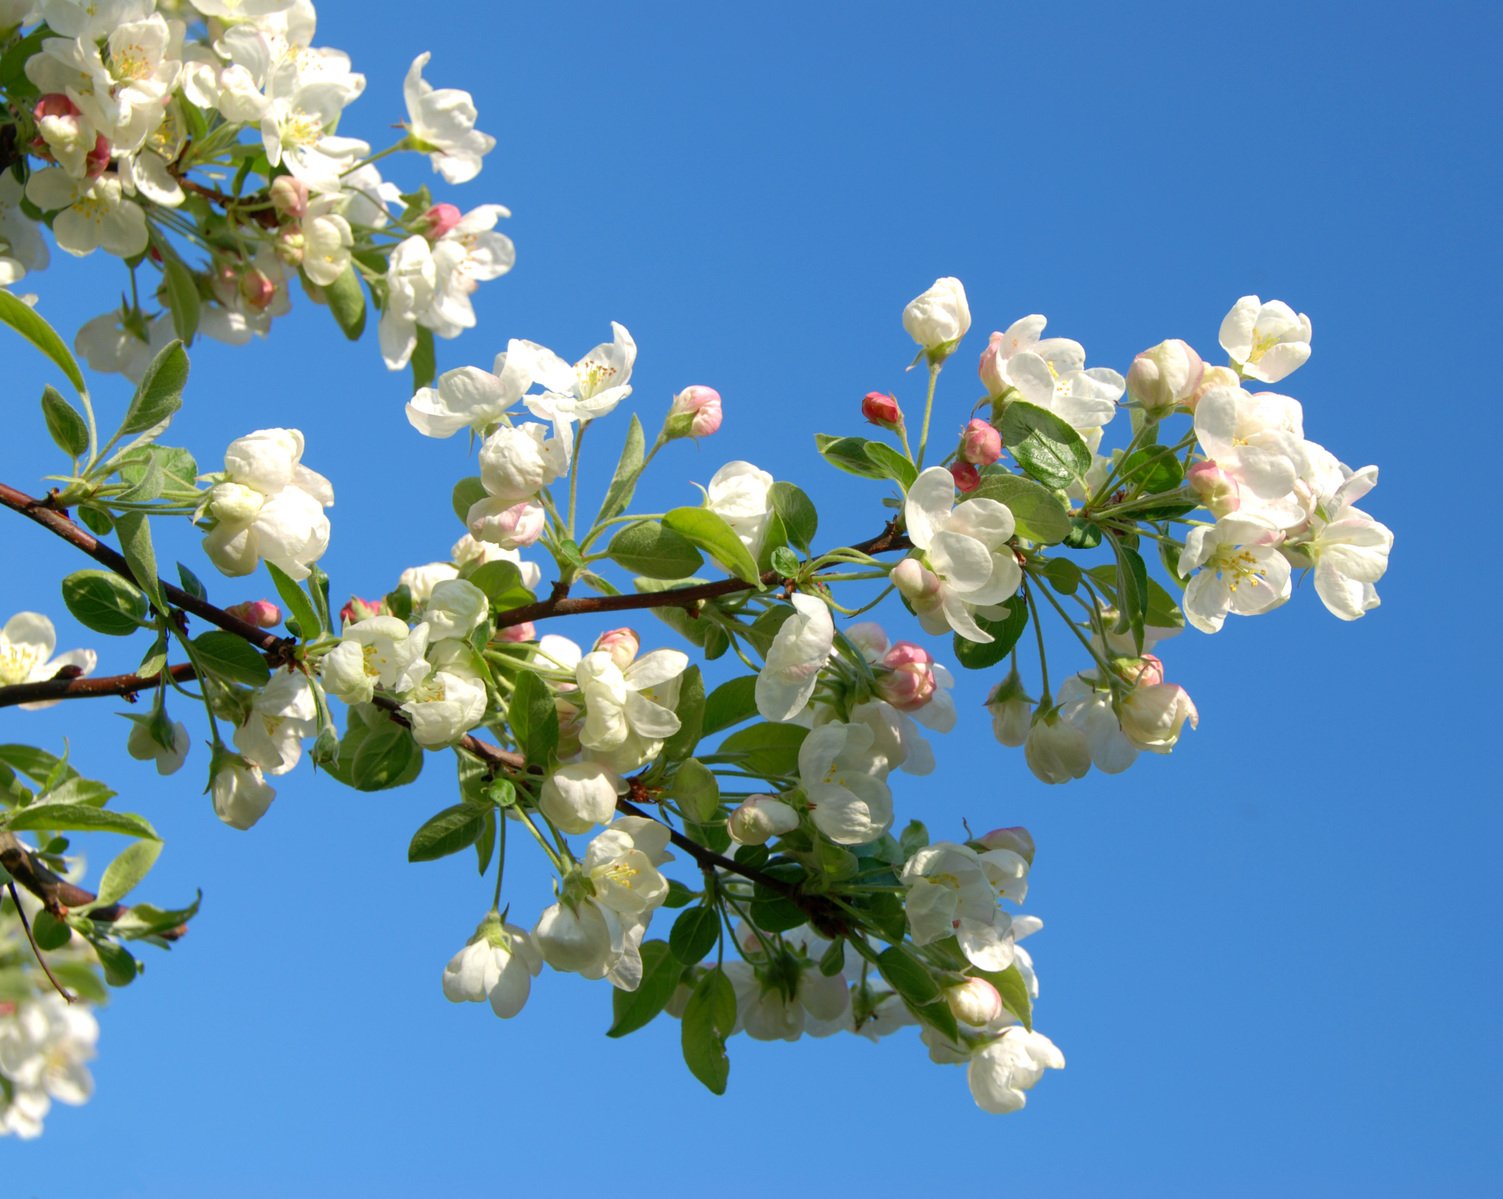 some white and pink flowers on a tree